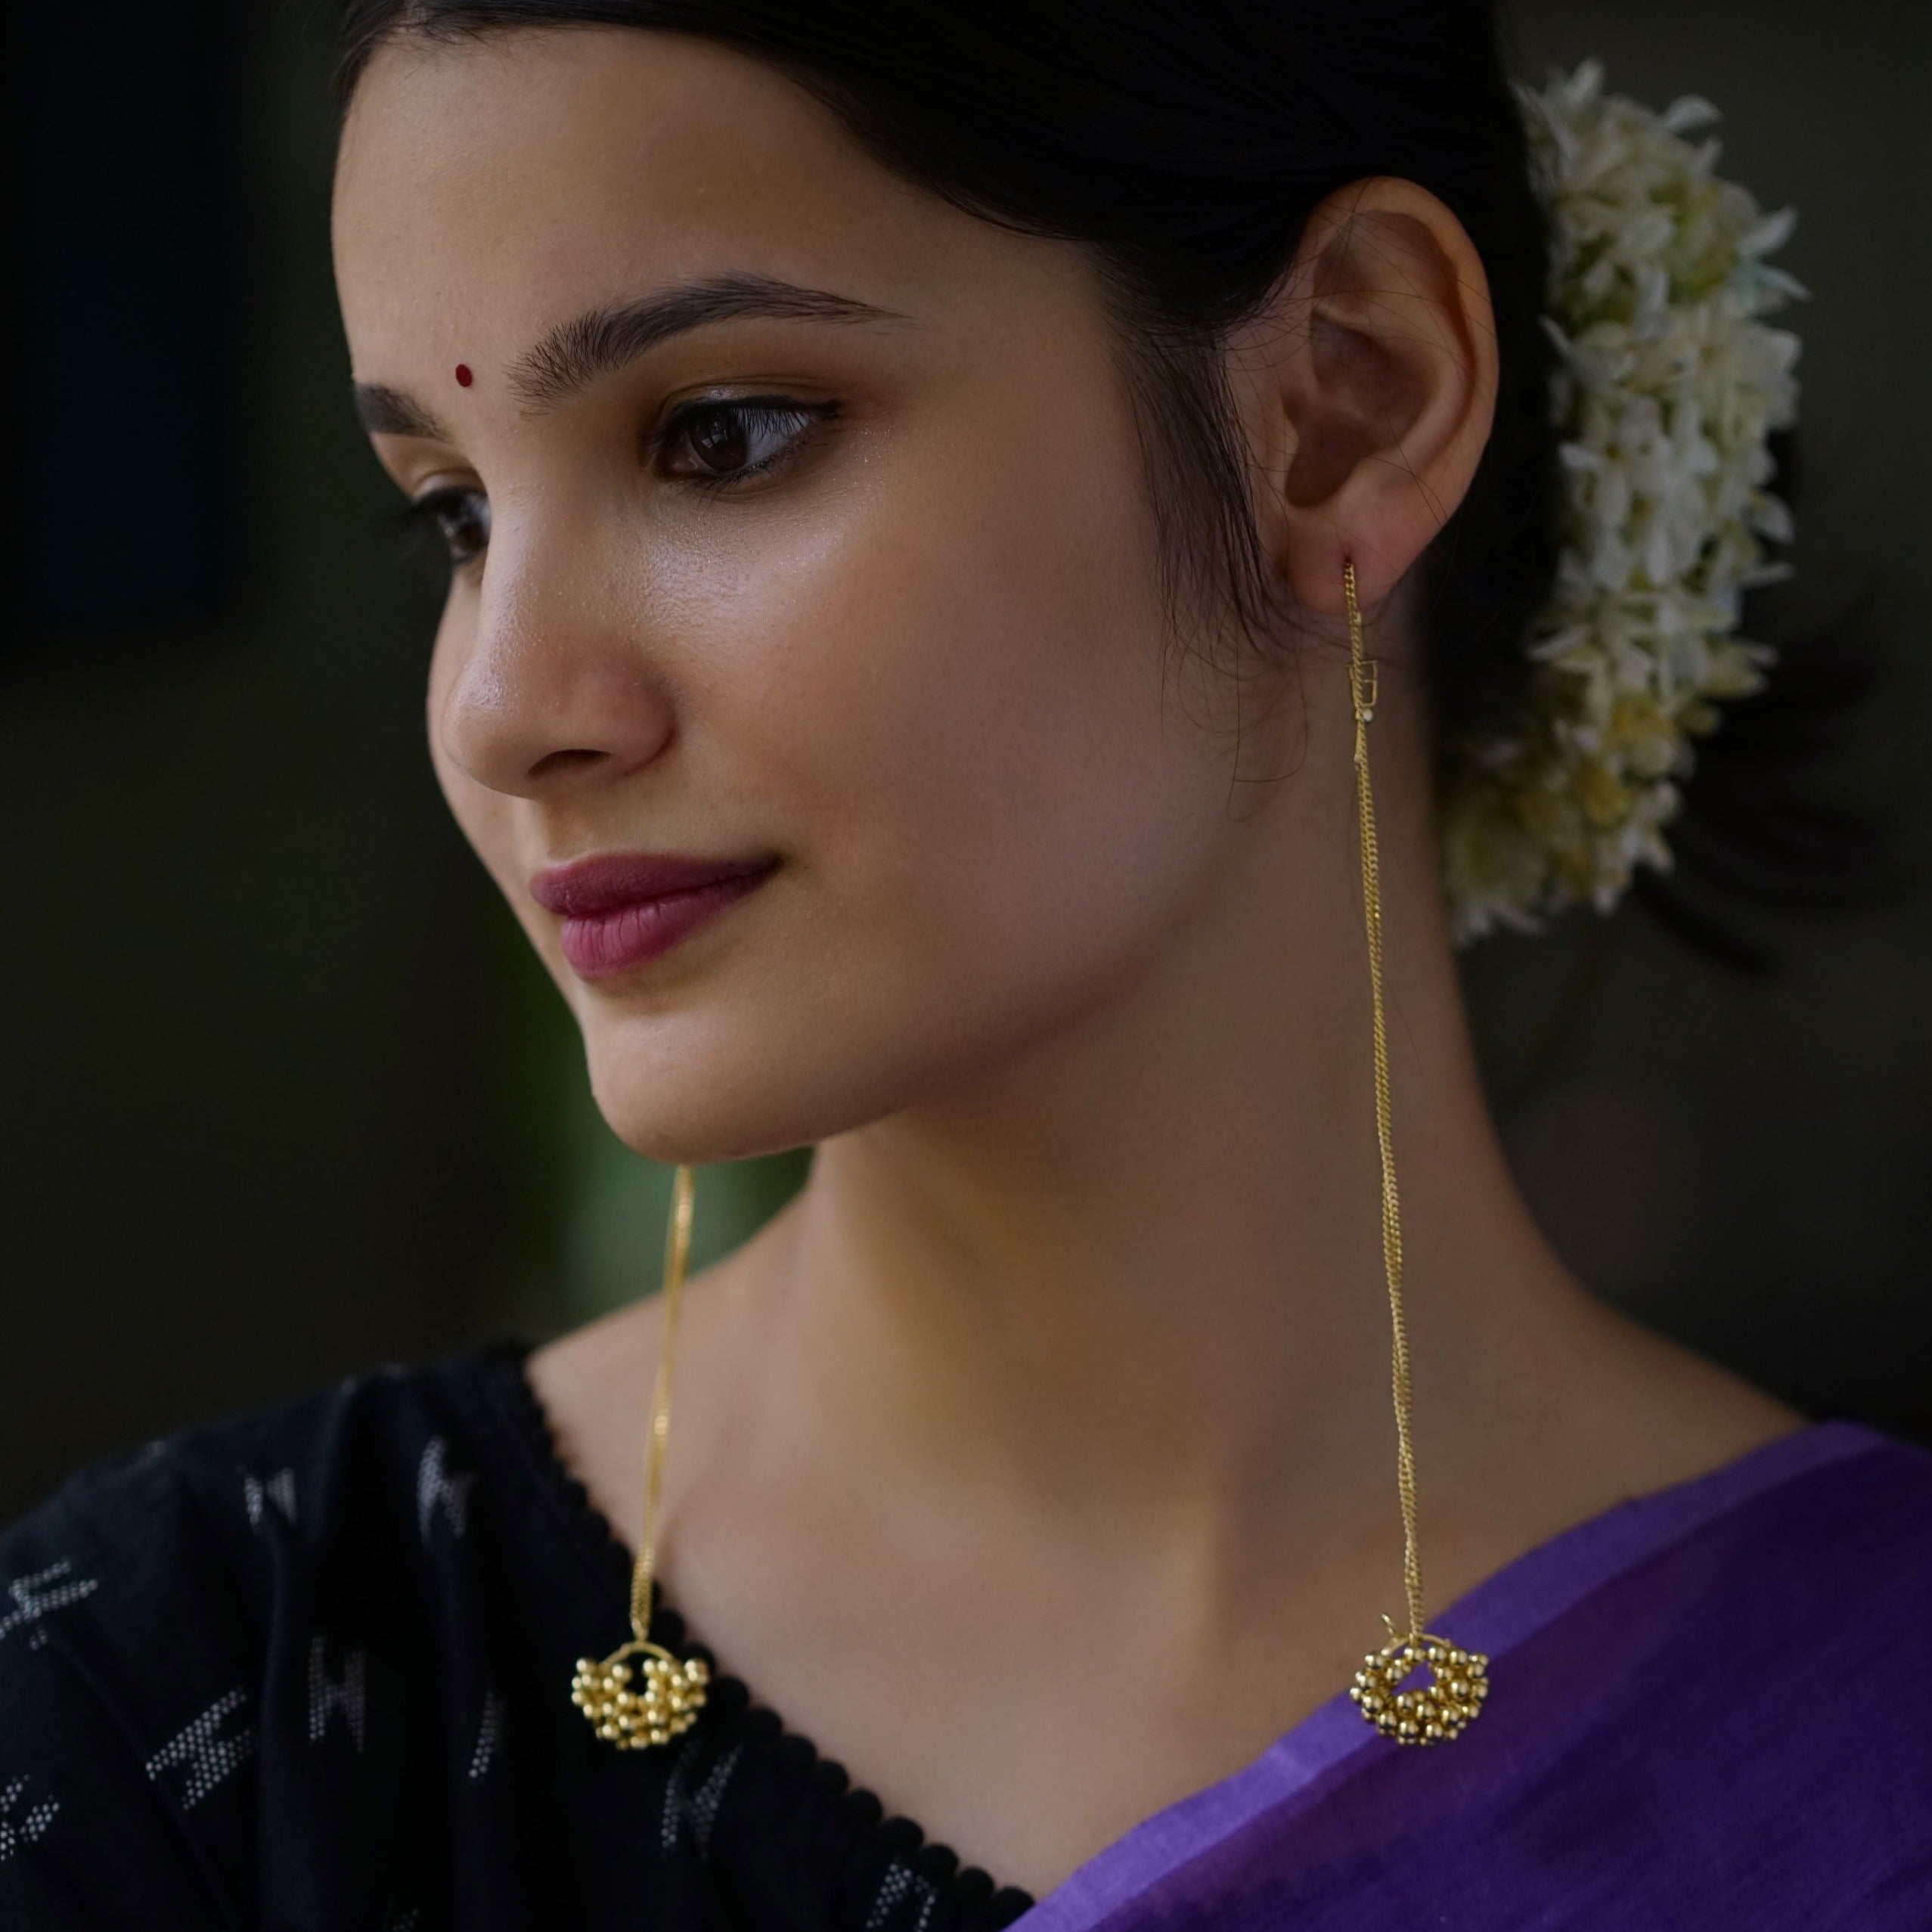 a woman wearing a purple saree and a pair of gold earrings